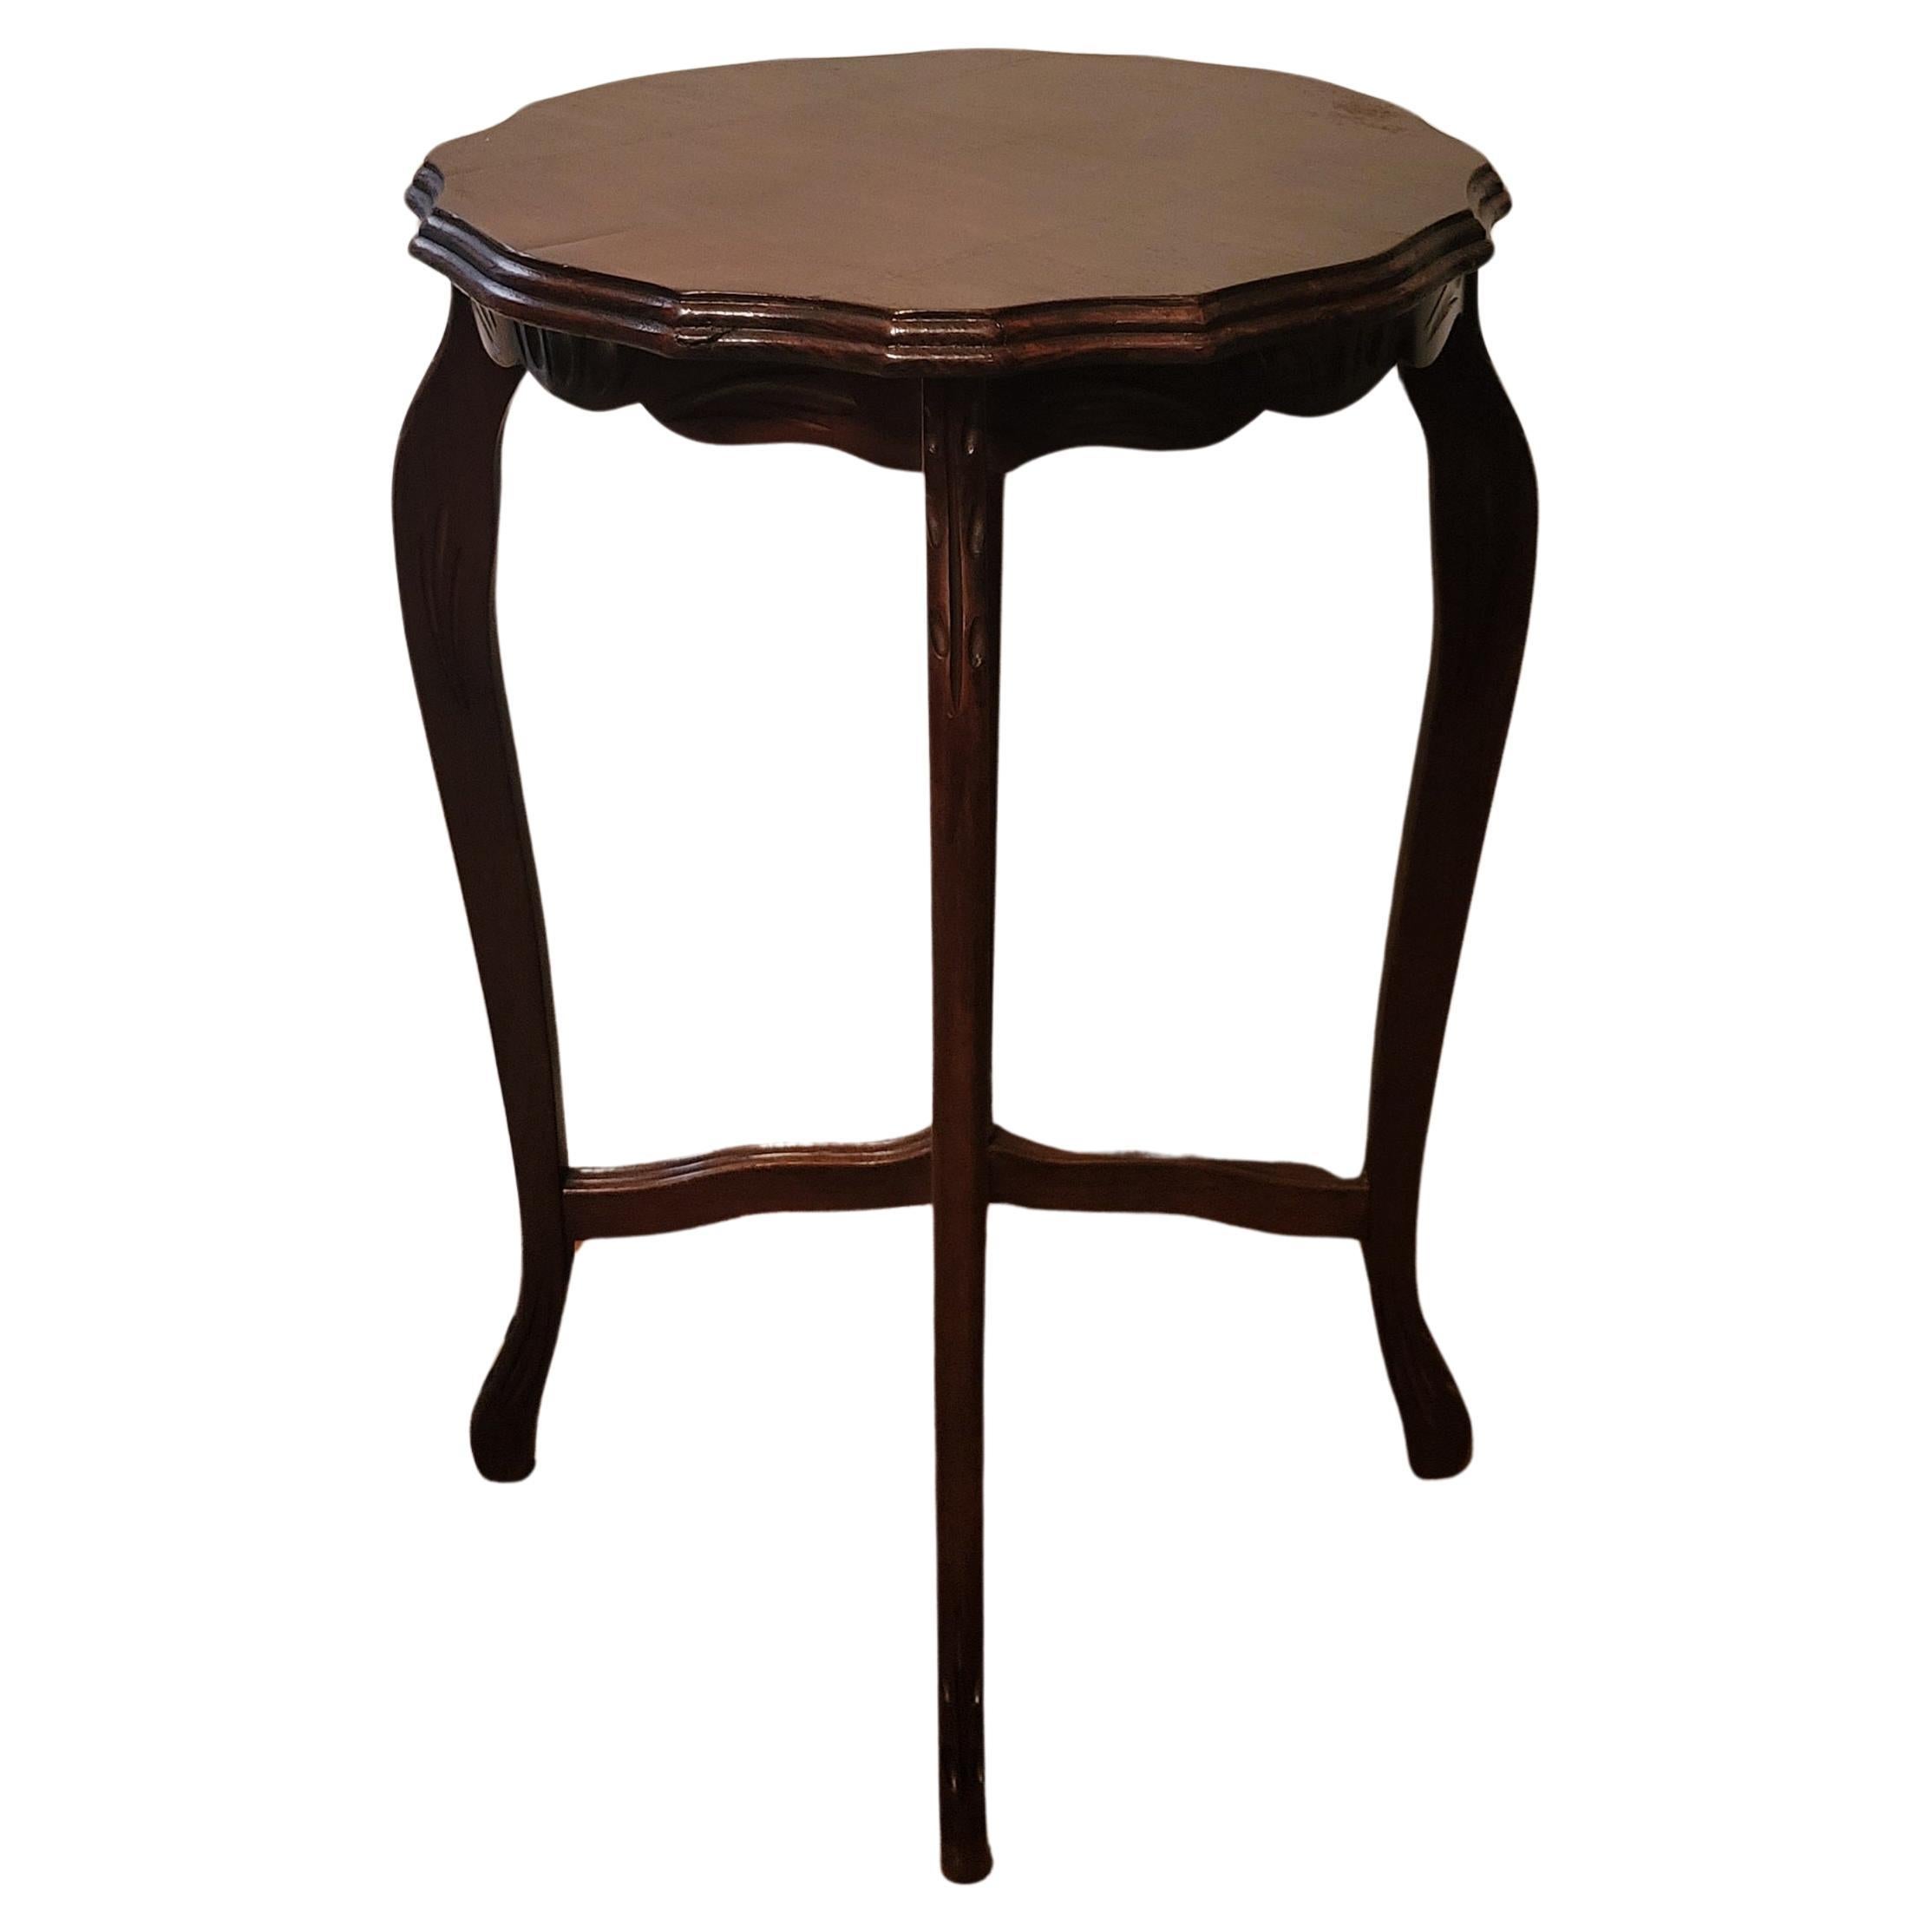 Antique, circa 1915-s Scalloped Edge Solid Wood Side Table For Sale